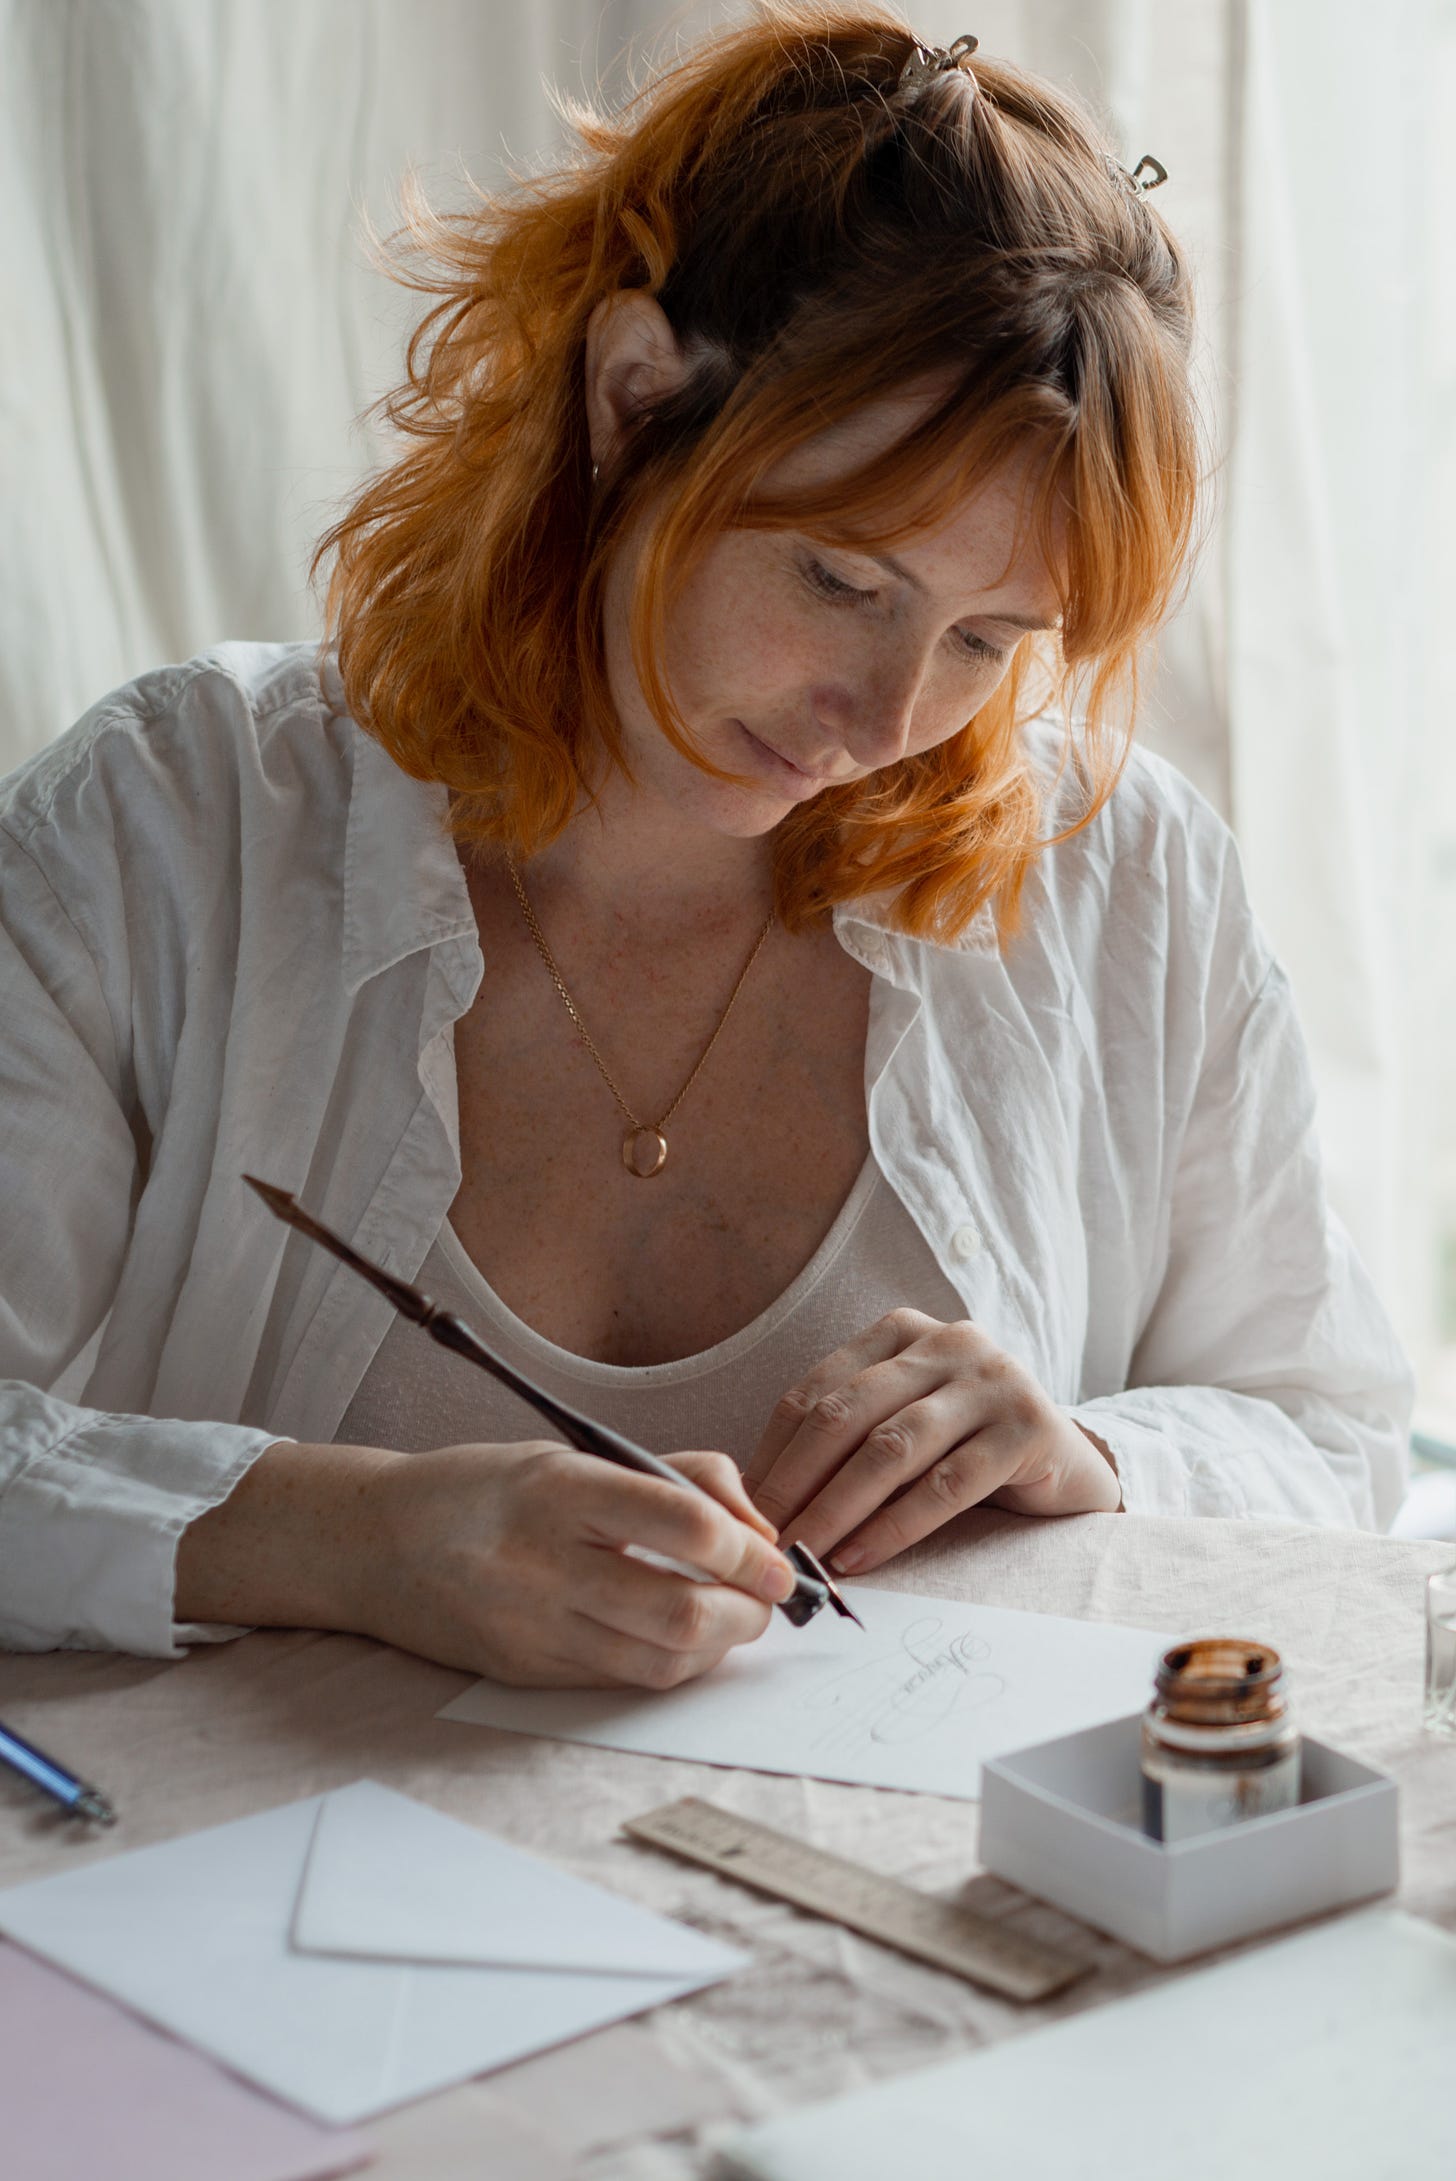 Red haired woman doing calligraphy on an envelope